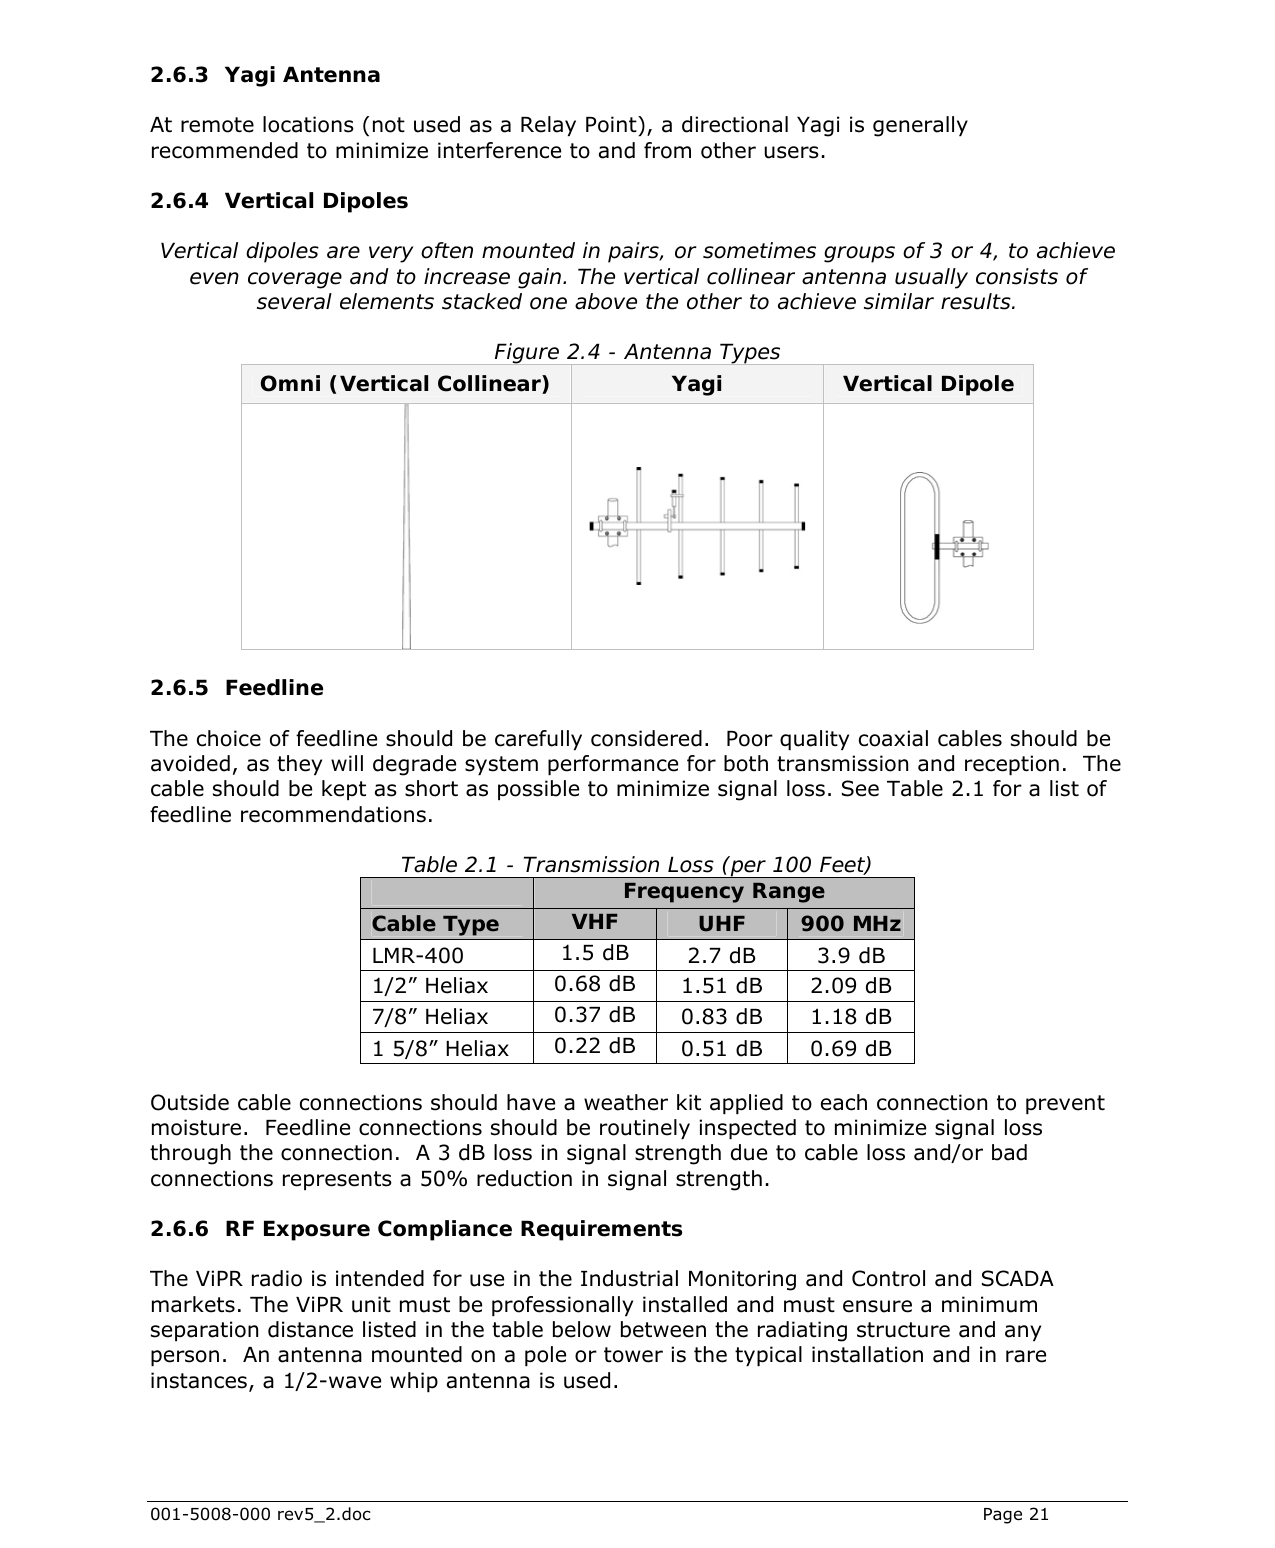  001-5008-000 rev5_2.doc    Page 21 2.6.3 Yagi Antenna At remote locations (not used as a Relay Point), a directional Yagi is generally recommended to minimize interference to and from other users.  2.6.4 Vertical Dipoles Vertical dipoles are very often mounted in pairs, or sometimes groups of 3 or 4, to achieve even coverage and to increase gain. The vertical collinear antenna usually consists of several elements stacked one above the other to achieve similar results. Figure 2.4 - Antenna Types Omni (Vertical Collinear)  Yagi  Vertical Dipole    2.6.5 Feedline The choice of feedline should be carefully considered.  Poor quality coaxial cables should be avoided, as they will degrade system performance for both transmission and reception.  The cable should be kept as short as possible to minimize signal loss. See Table 2.1 for a list of feedline recommendations.  Table 2.1 - Transmission Loss (per 100 Feet)  Frequency Range Cable Type  VHF  UHF  900 MHz LMR-400  1.5 dB  2.7 dB  3.9 dB 1/2” Heliax  0.68 dB  1.51 dB  2.09 dB 7/8” Heliax  0.37 dB  0.83 dB  1.18 dB 1 5/8” Heliax  0.22 dB  0.51 dB  0.69 dB  Outside cable connections should have a weather kit applied to each connection to prevent moisture.  Feedline connections should be routinely inspected to minimize signal loss through the connection.  A 3 dB loss in signal strength due to cable loss and/or bad connections represents a 50% reduction in signal strength. 2.6.6 RF Exposure Compliance Requirements The ViPR radio is intended for use in the Industrial Monitoring and Control and SCADA markets. The ViPR unit must be professionally installed and must ensure a minimum separation distance listed in the table below between the radiating structure and any person.  An antenna mounted on a pole or tower is the typical installation and in rare instances, a 1/2-wave whip antenna is used.     